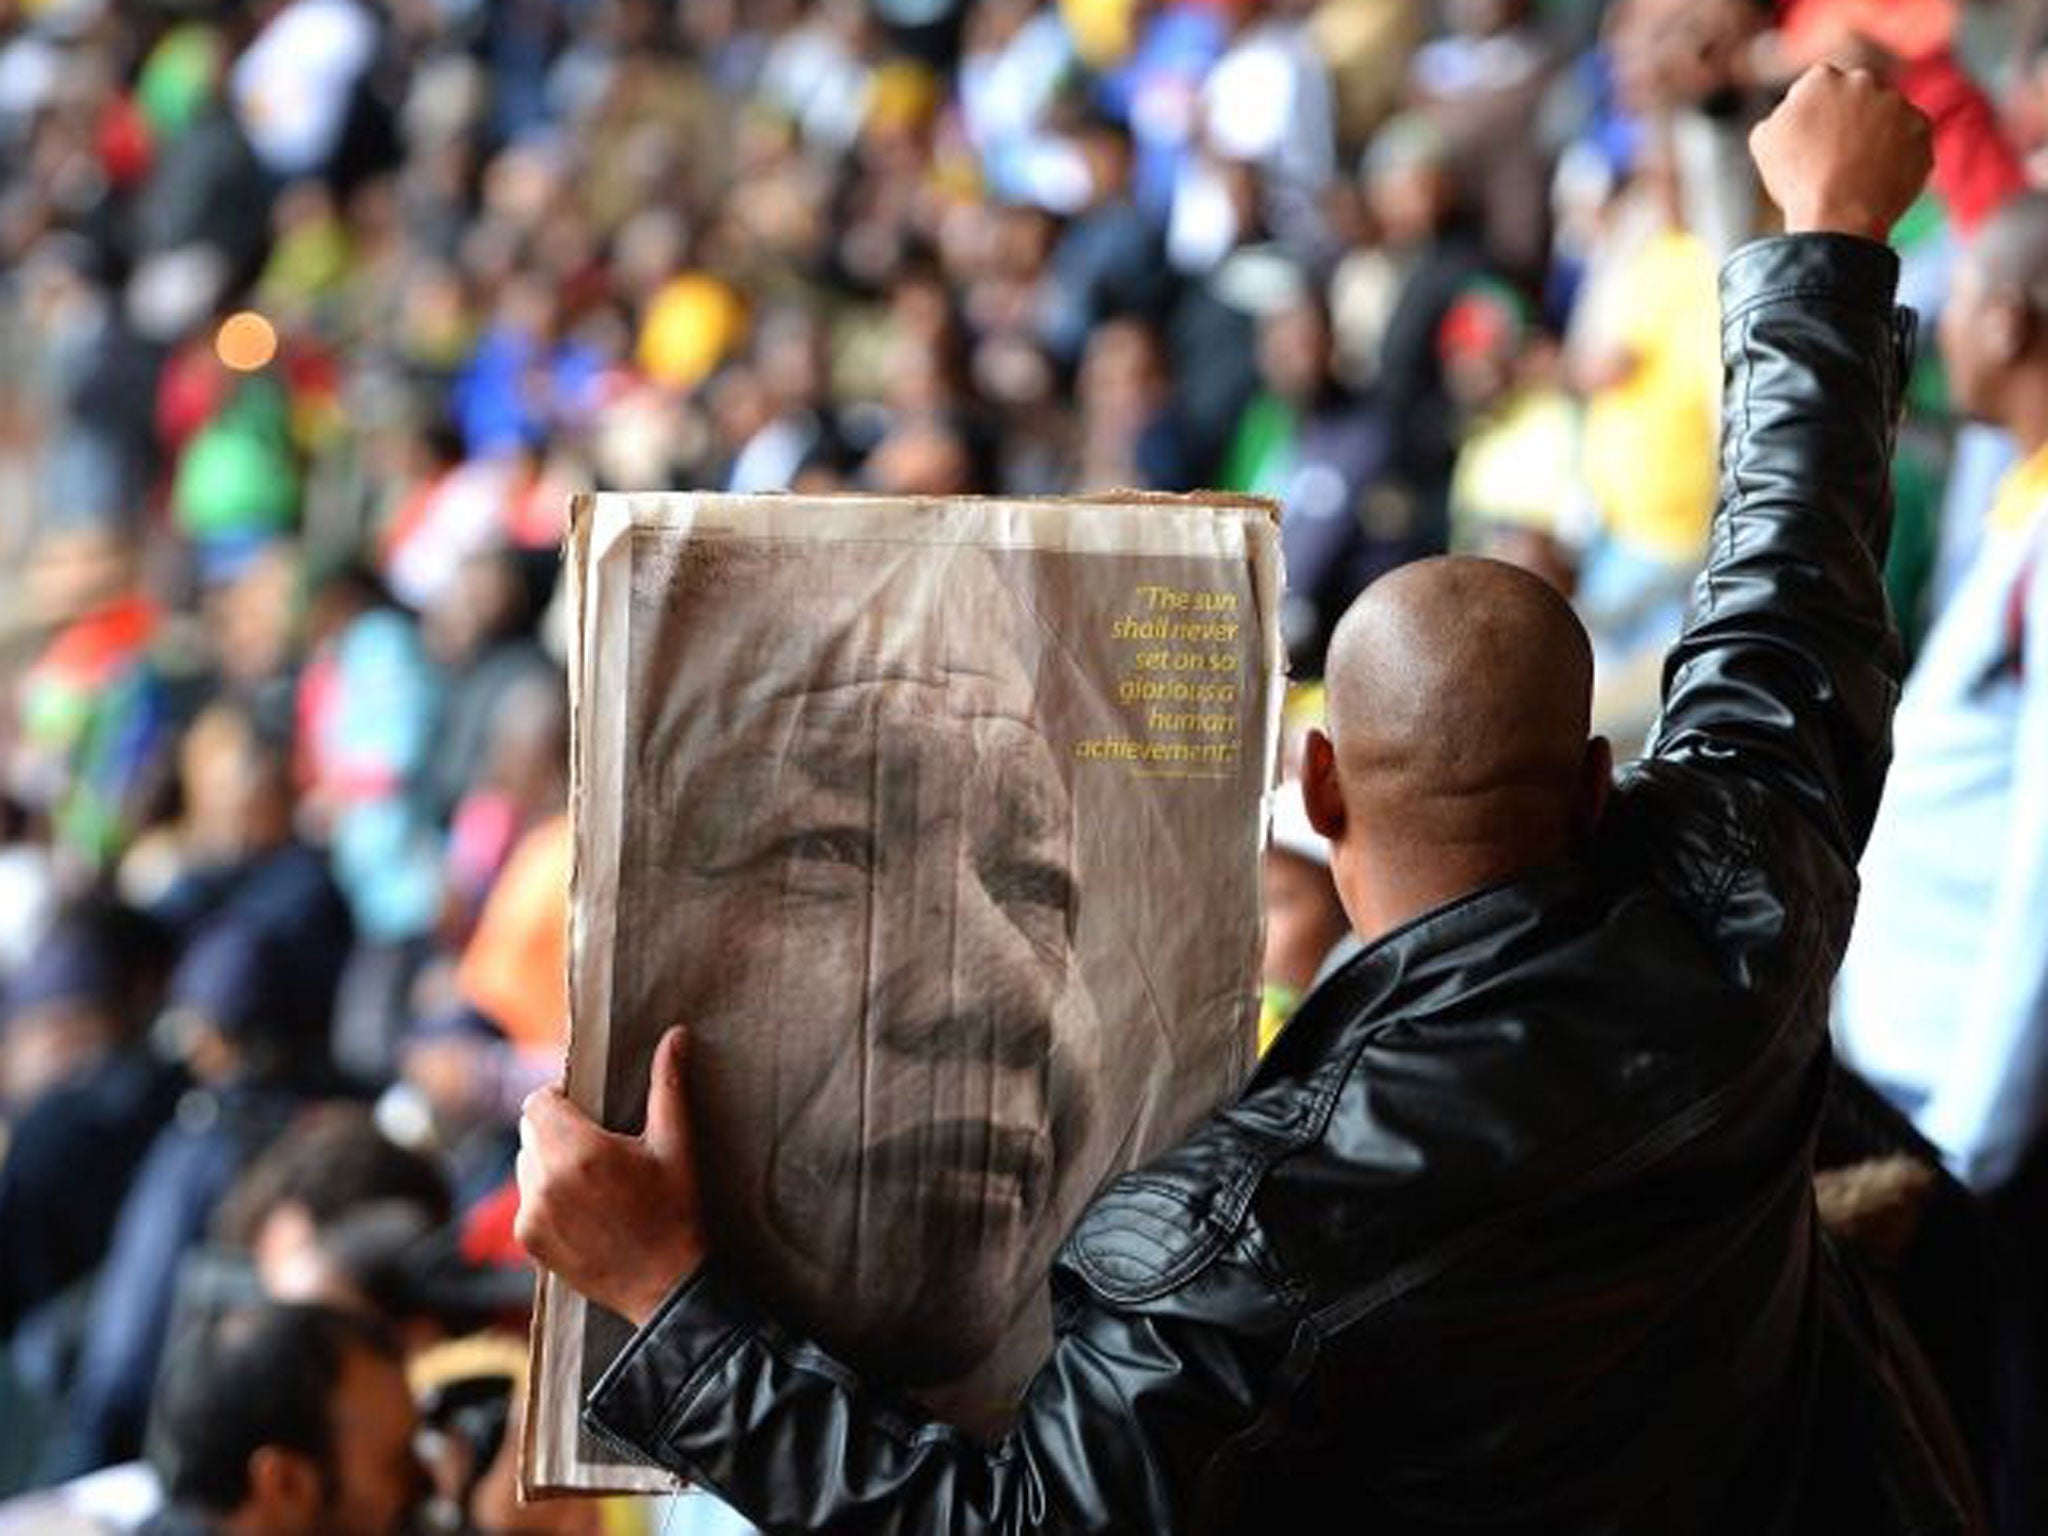 Members of the public sing and dance inside the FNB Stadium, on December 10, 2013 in Johannesburg, South Africa